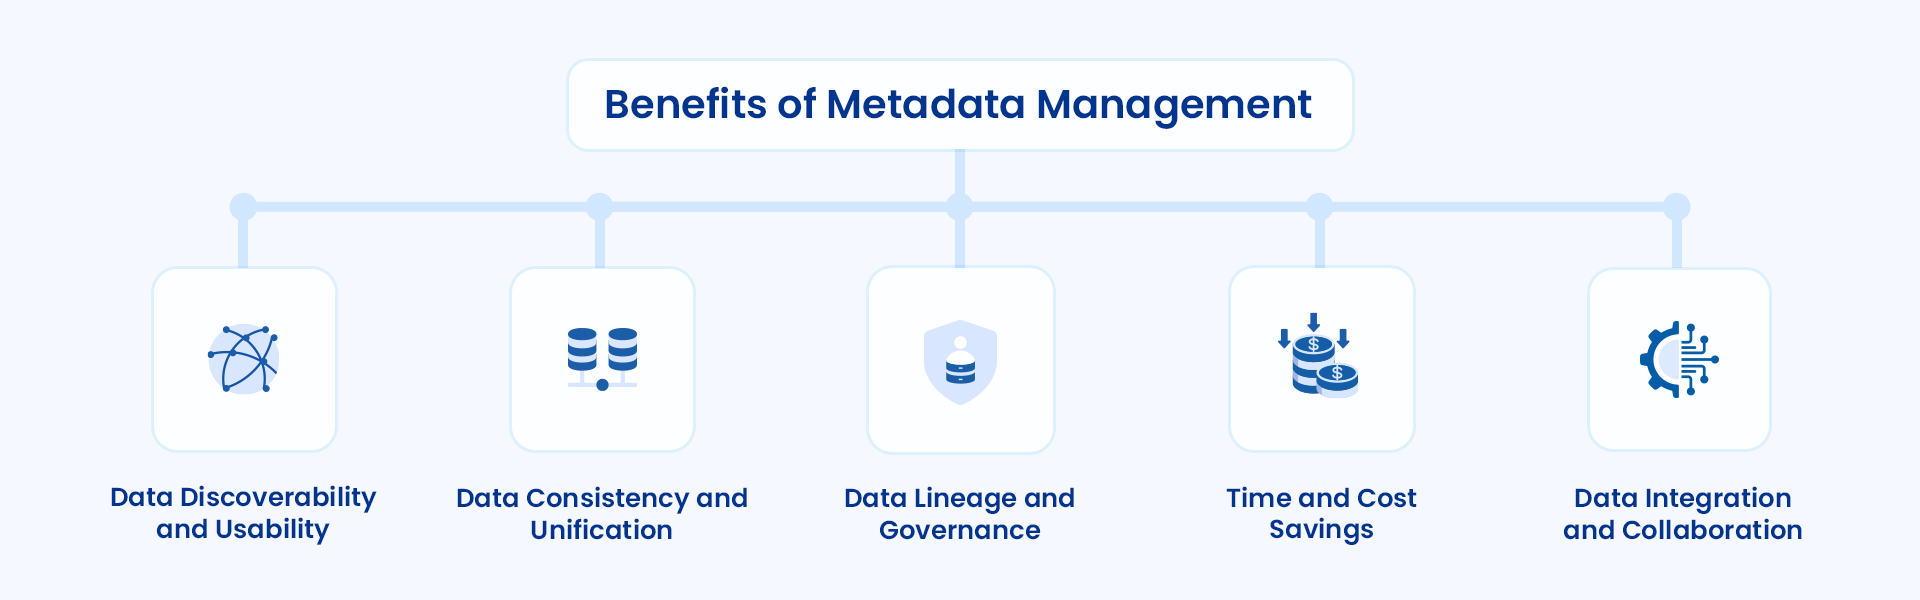 Benefits of metadata management. Image by Astera.